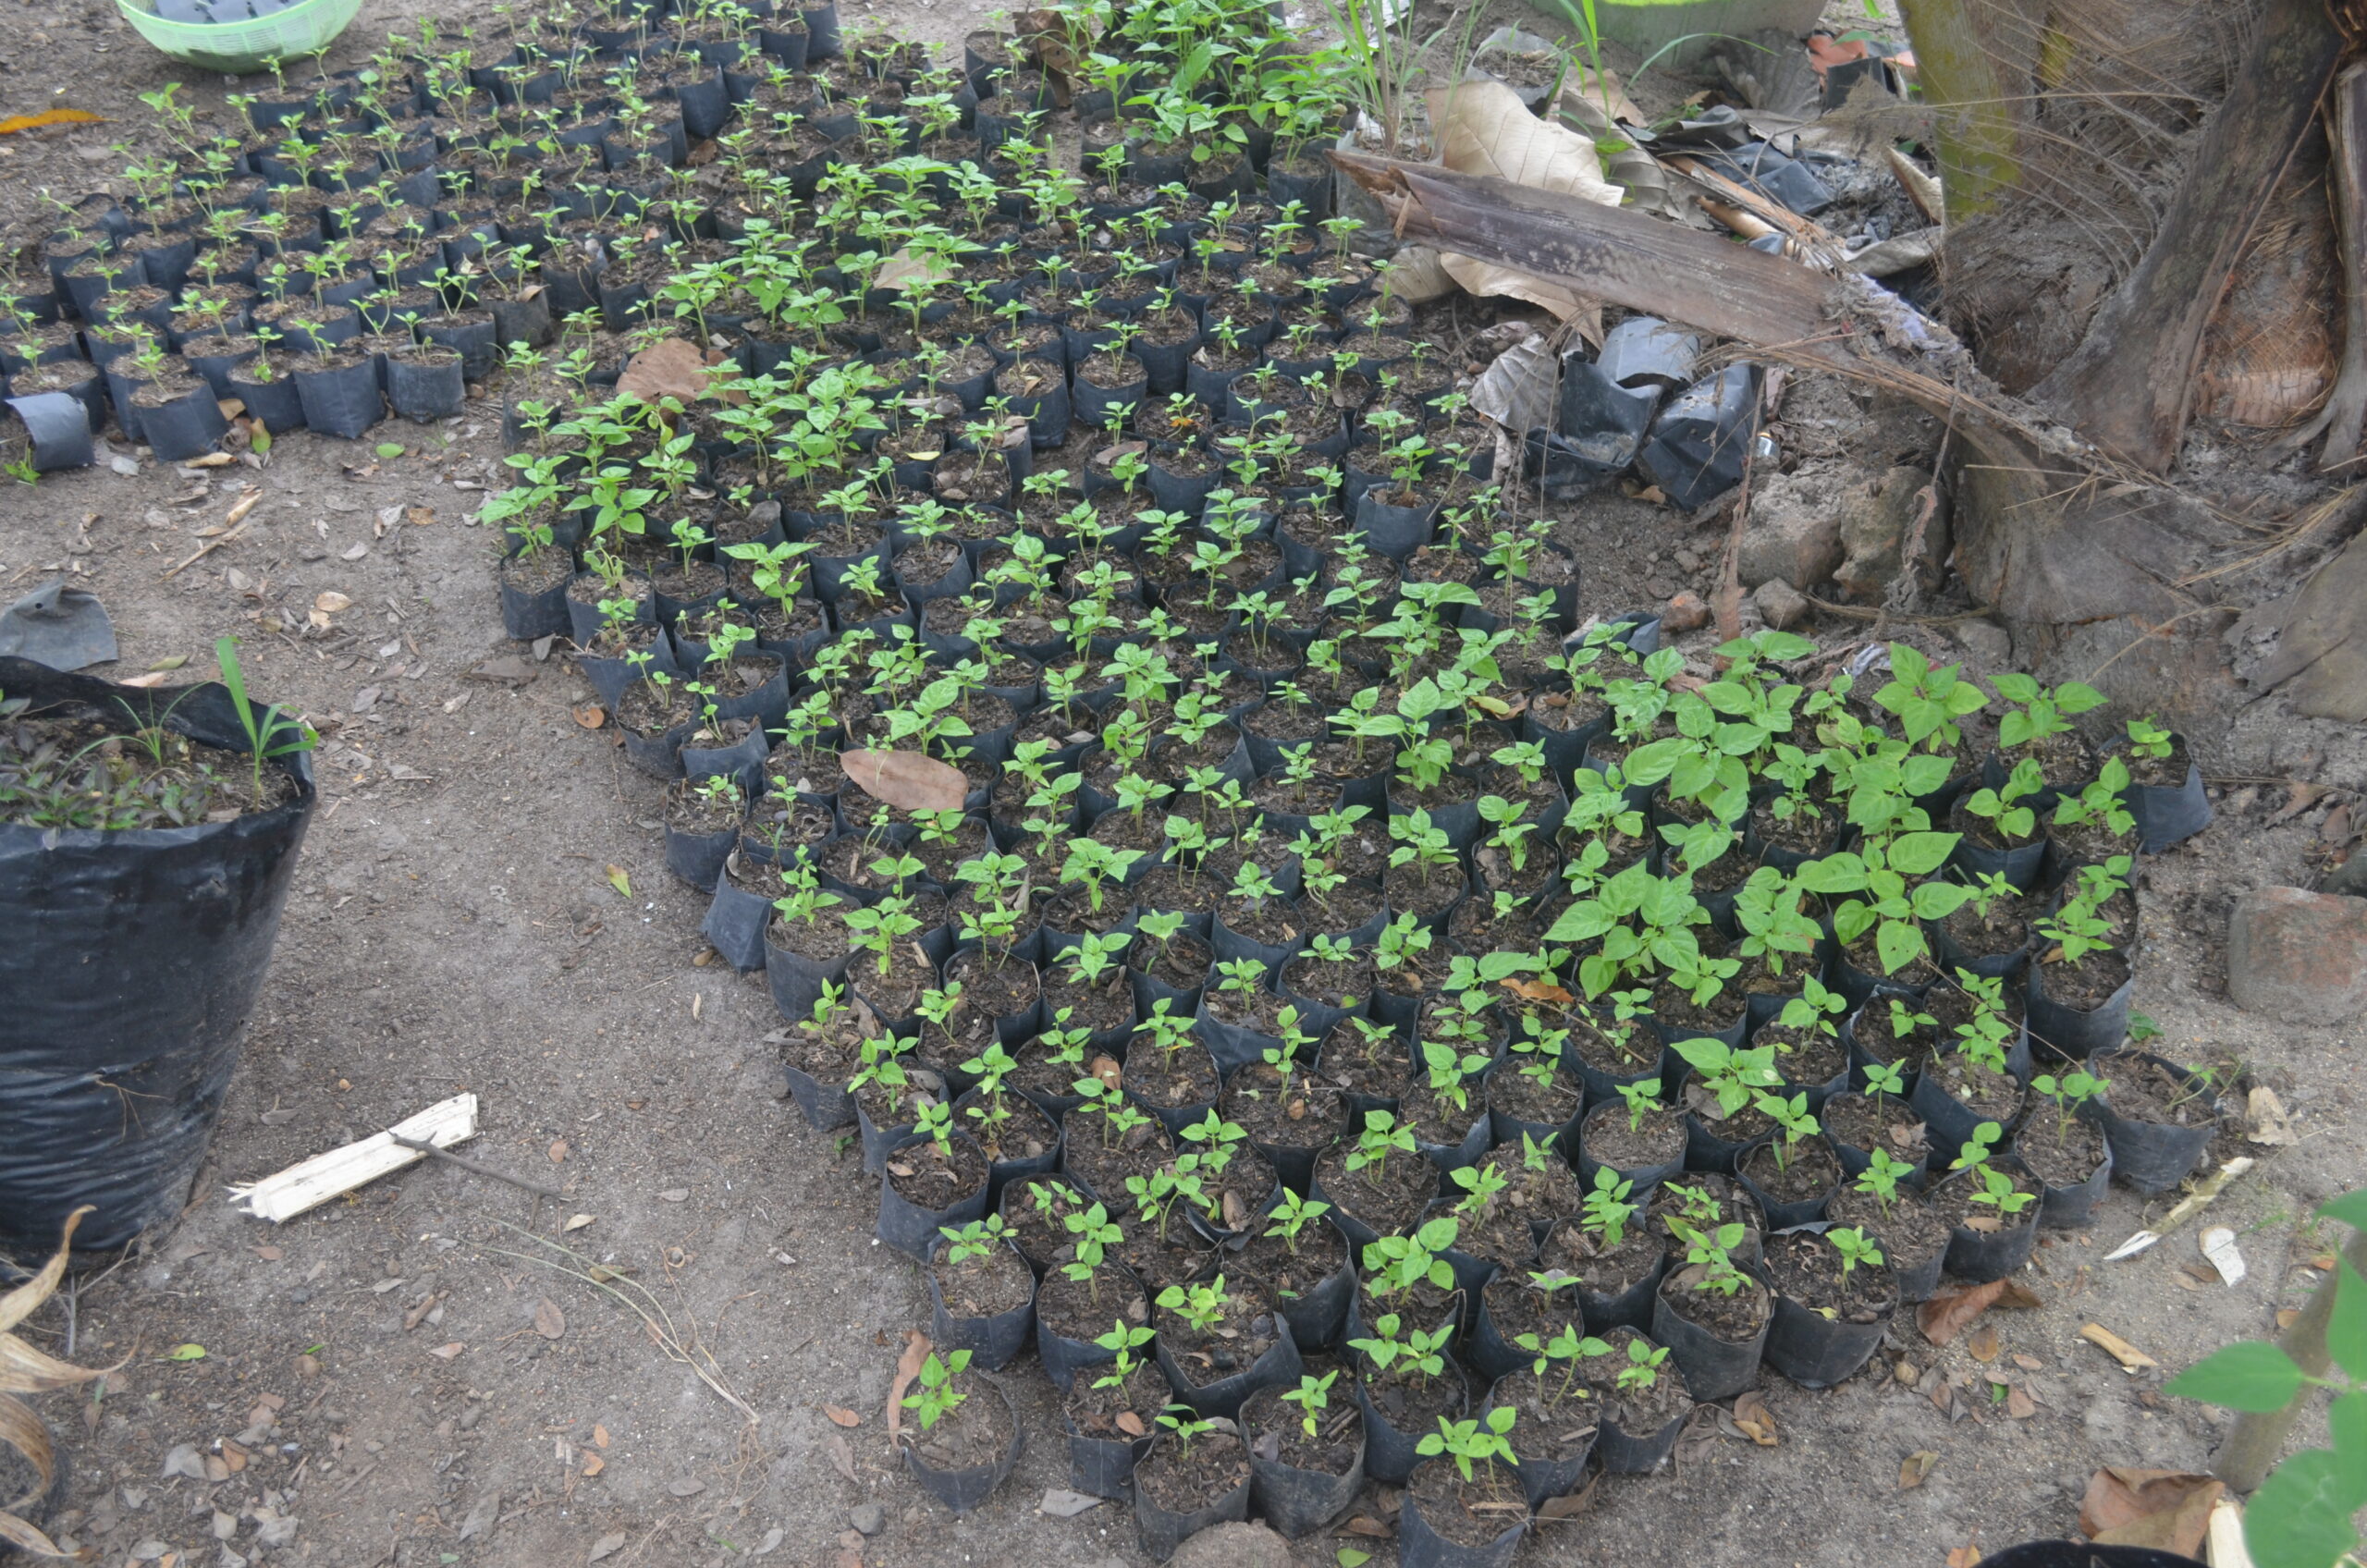 Hot Chili Pepper Cultivation as a Climate Smart Approach in the Dry Zone of Sri Lanka